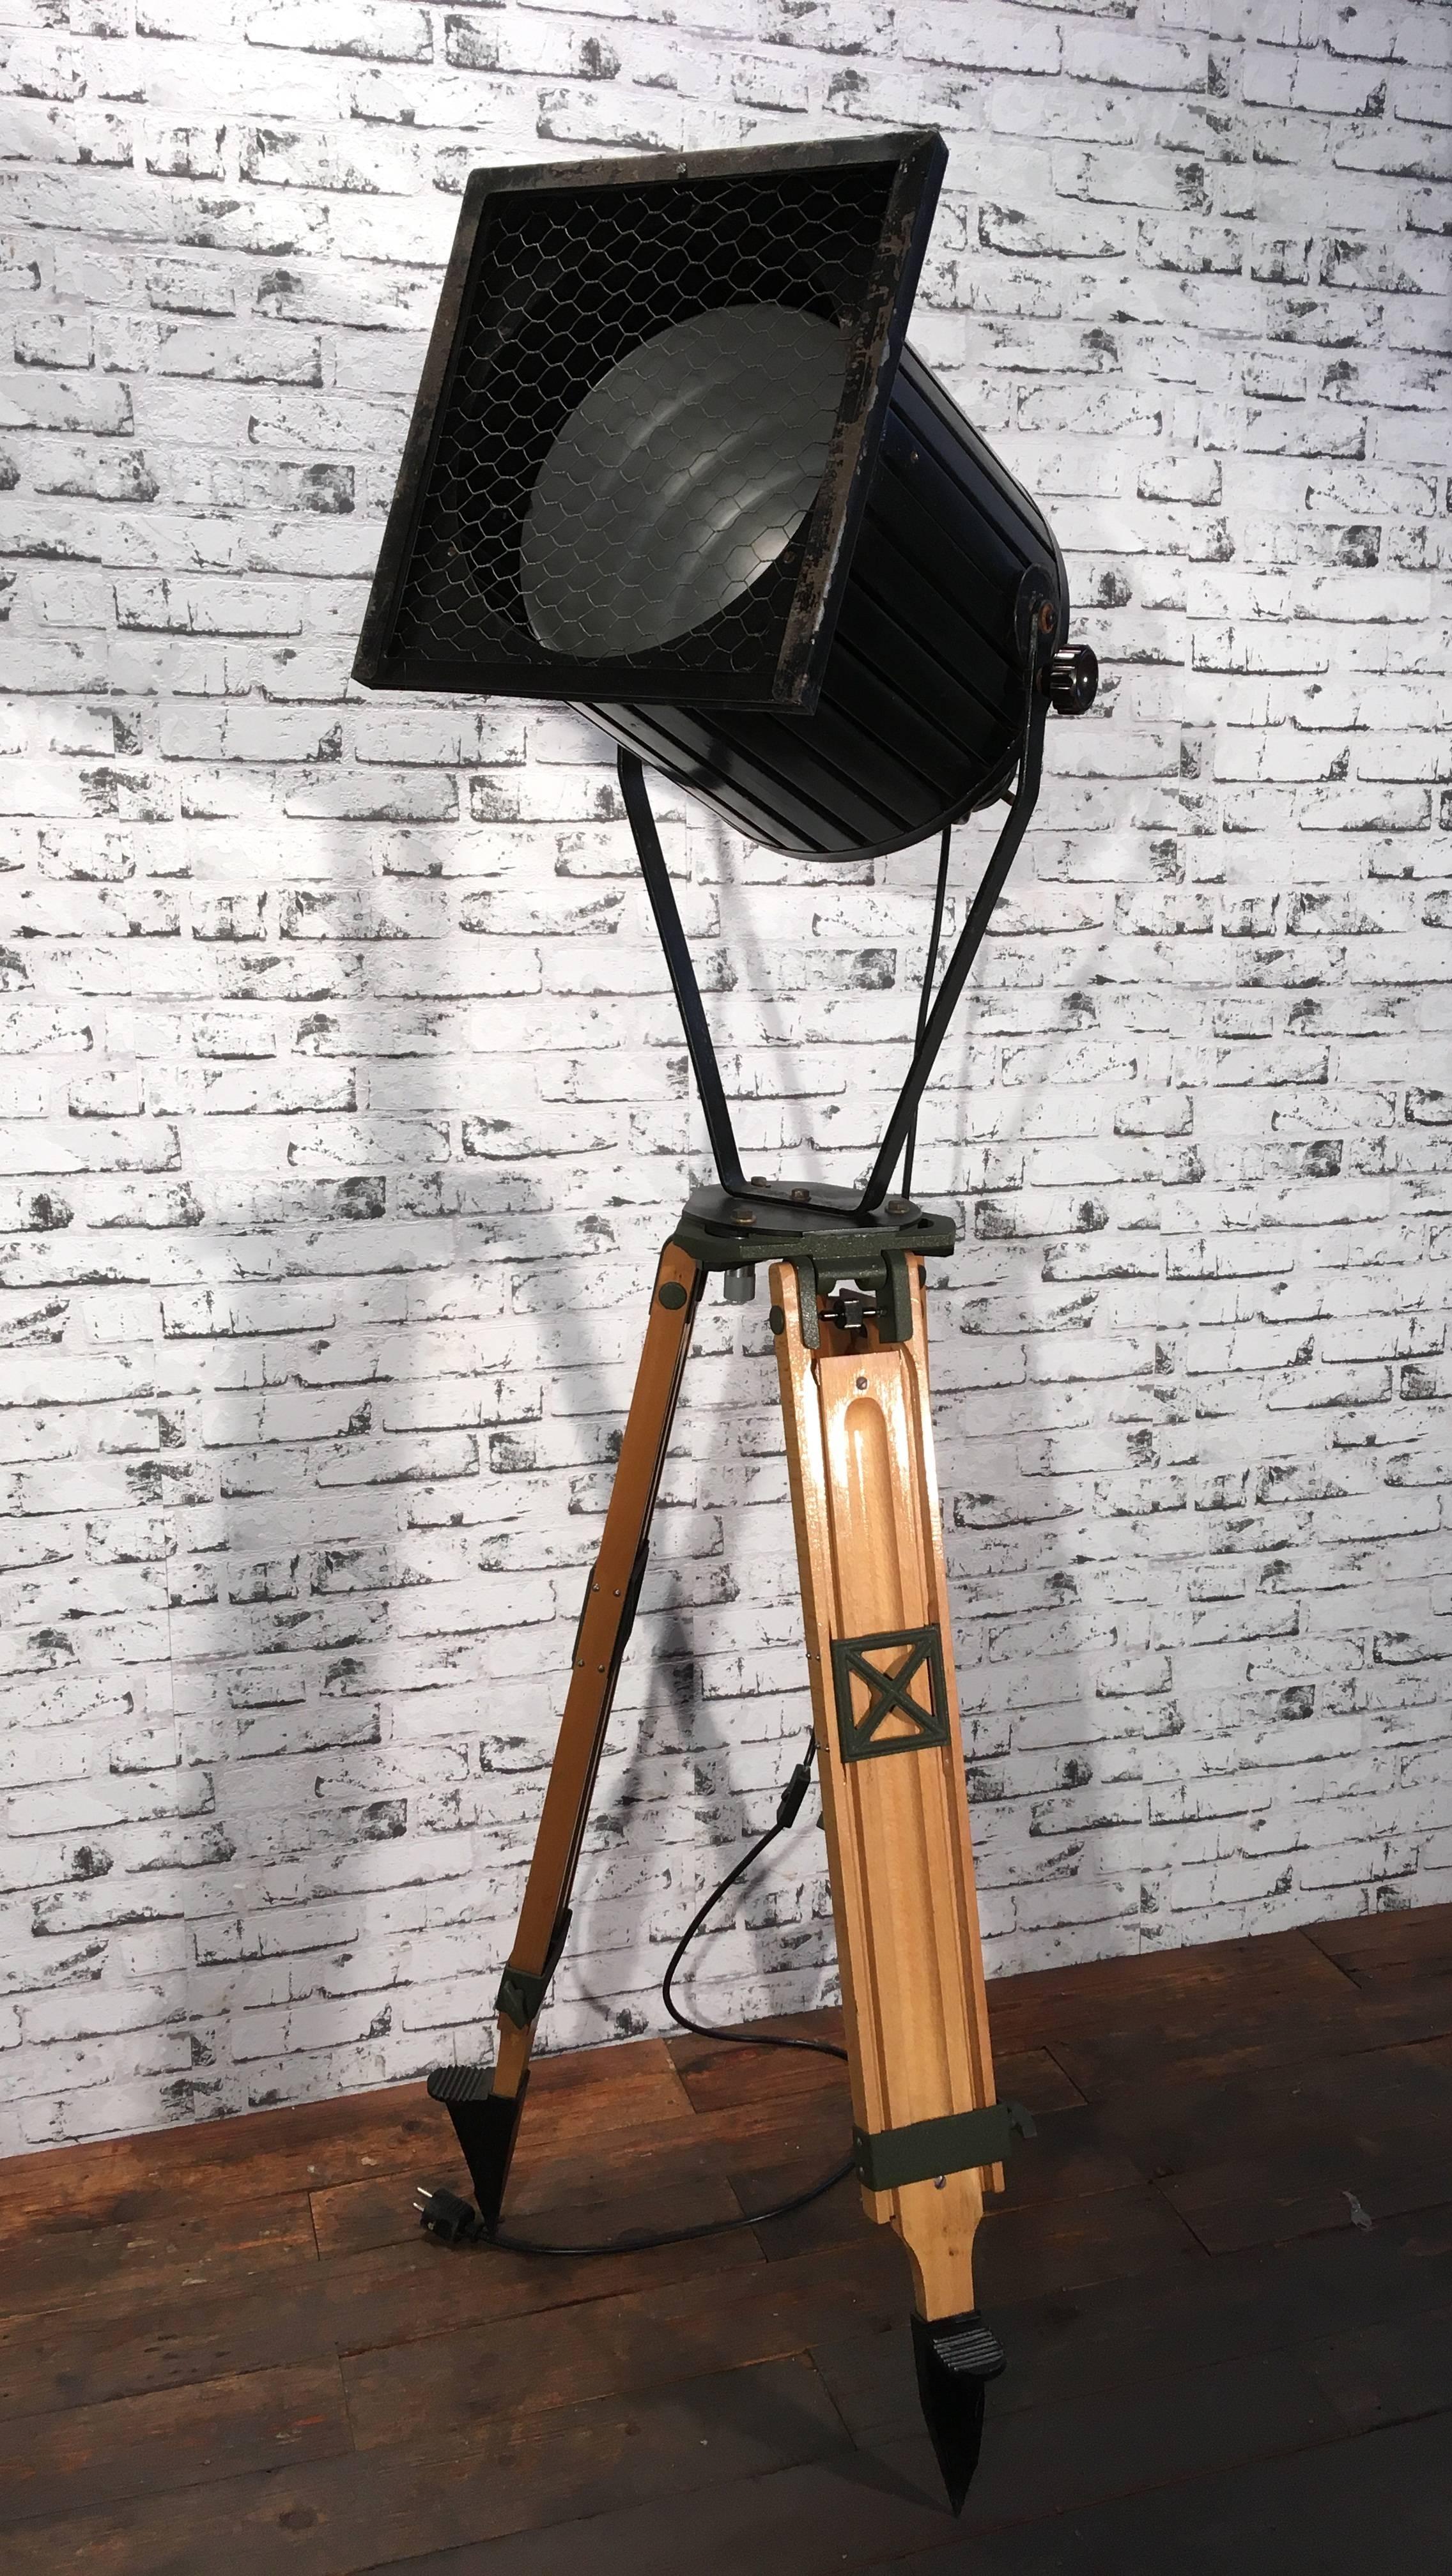 Industrial spotlight on wooden tripod. Adjustable height and angle. Black metal body. Grey grid. Min. total height: 170 cm. Max. total height: 220 cm. New porcelain socket E 27. New wire. Very good vintage condition.
Weight 20 kg.